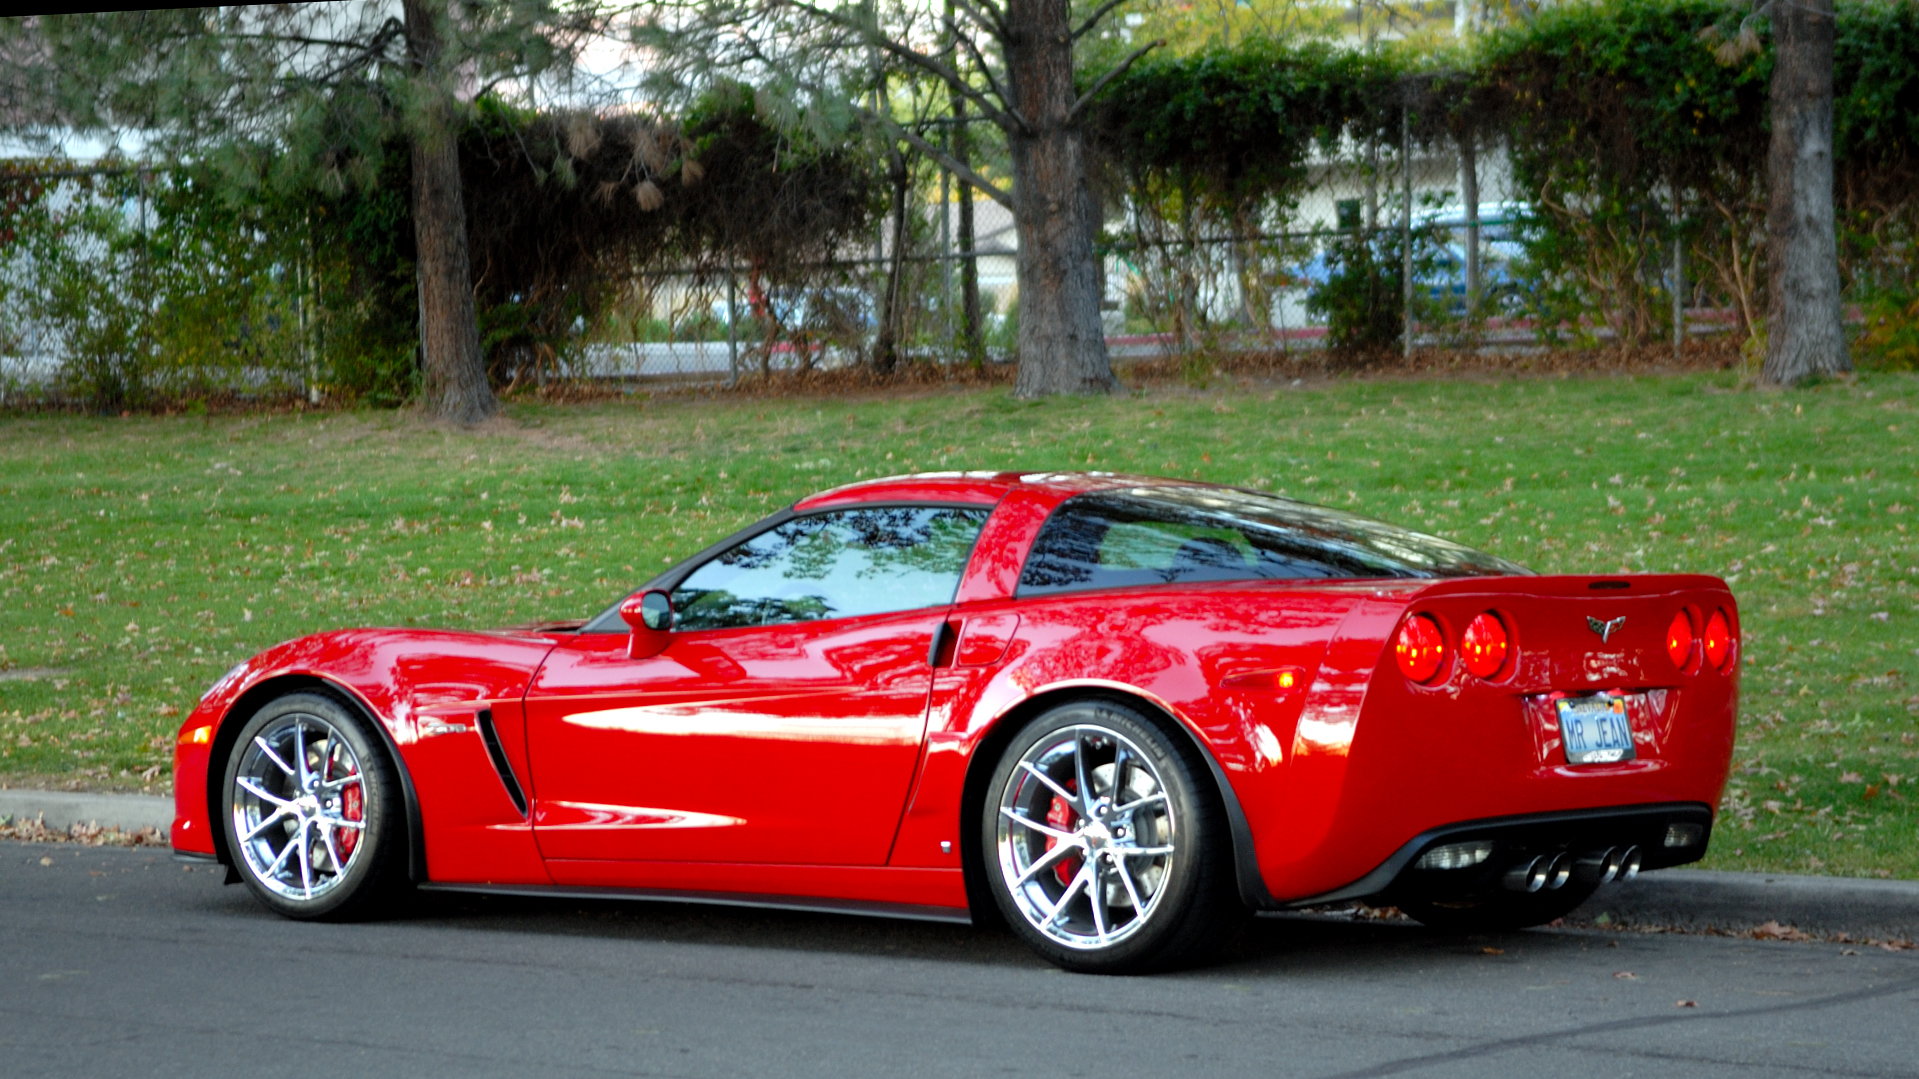 Z06 Side skirts and flaps. Lets see them - Page 2 - CorvetteForum